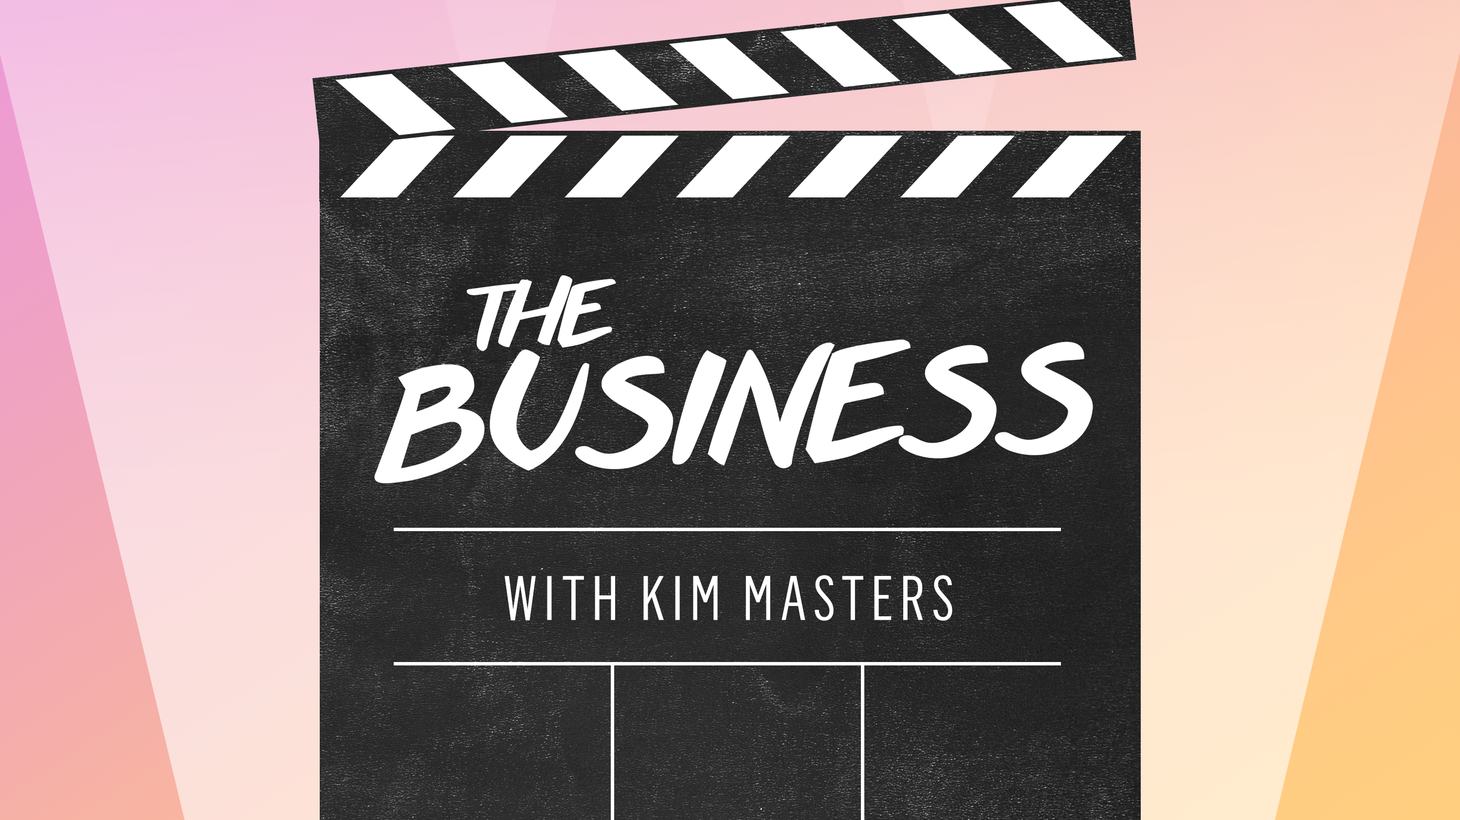 This week on The Business, six degrees of celebrity philanthropy with, of course, Kevin Bacon - actor, musician and on-line philanthropist.